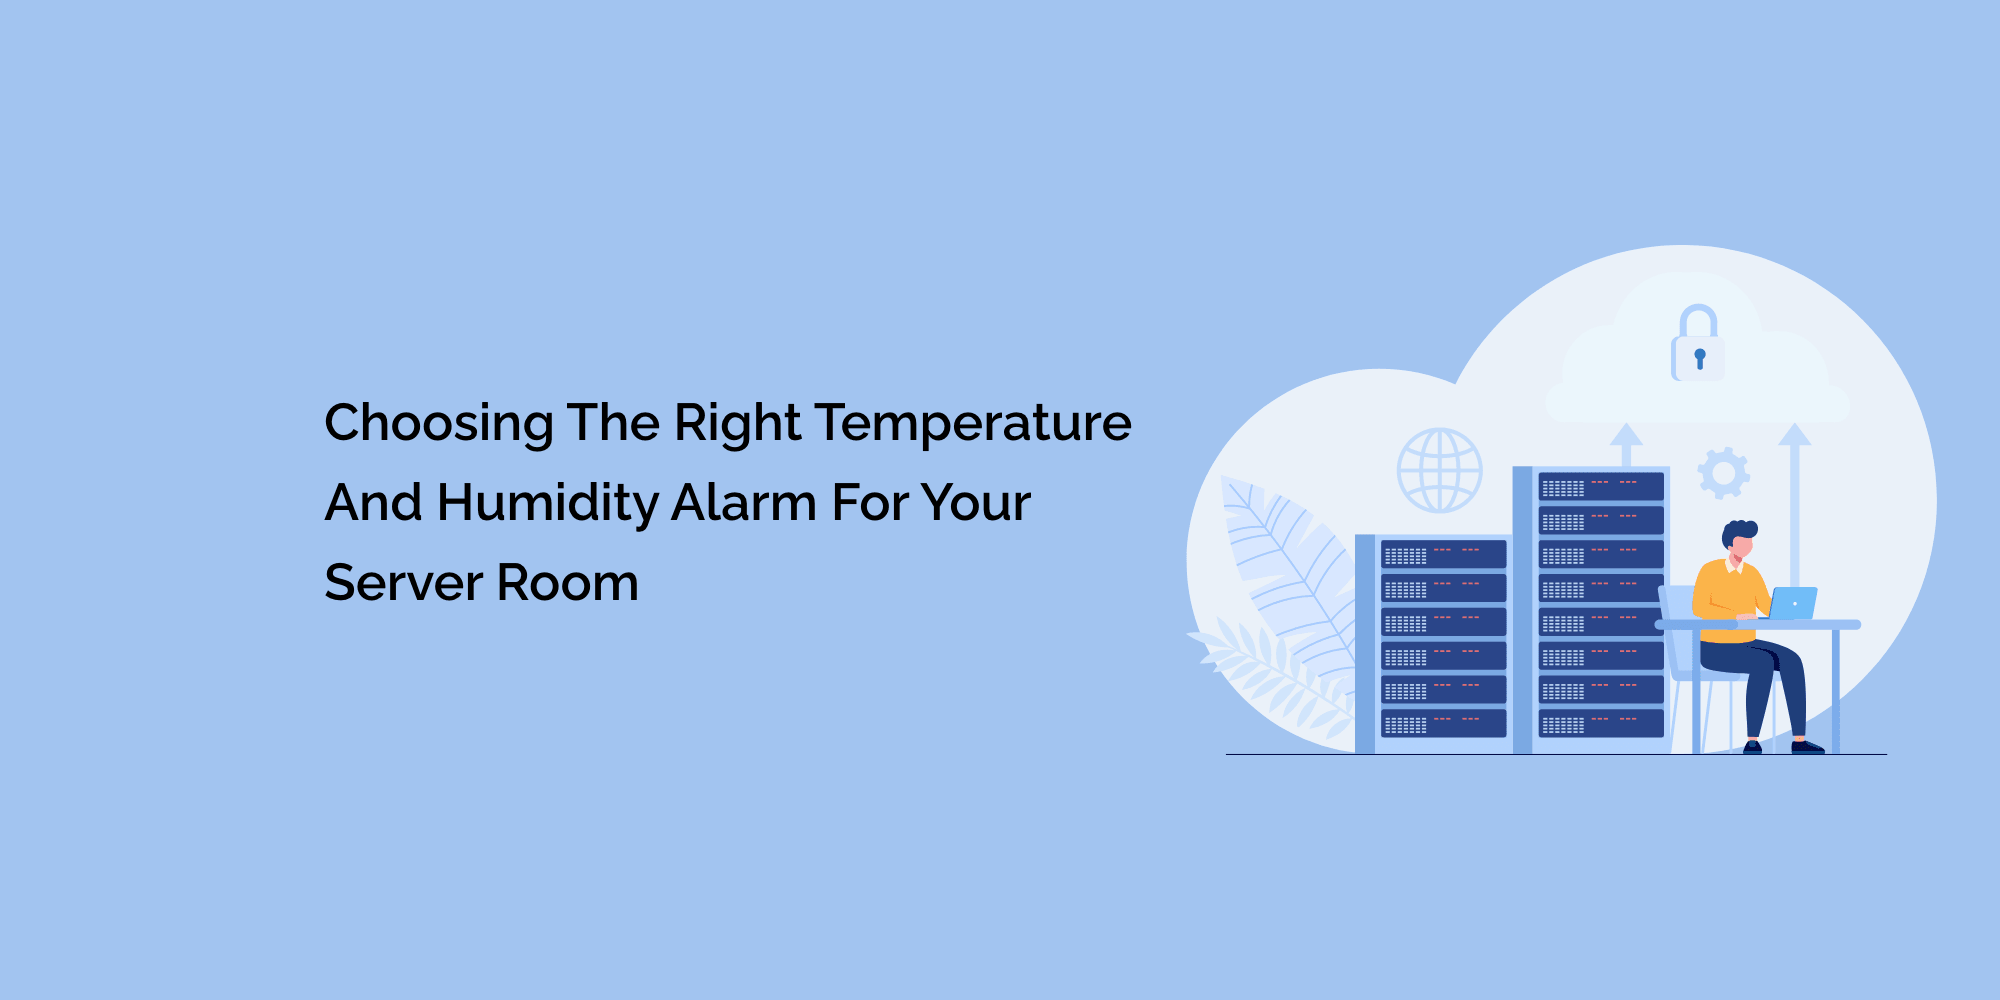 Choosing the Right Temperature and Humidity Alarm for Your Server Room